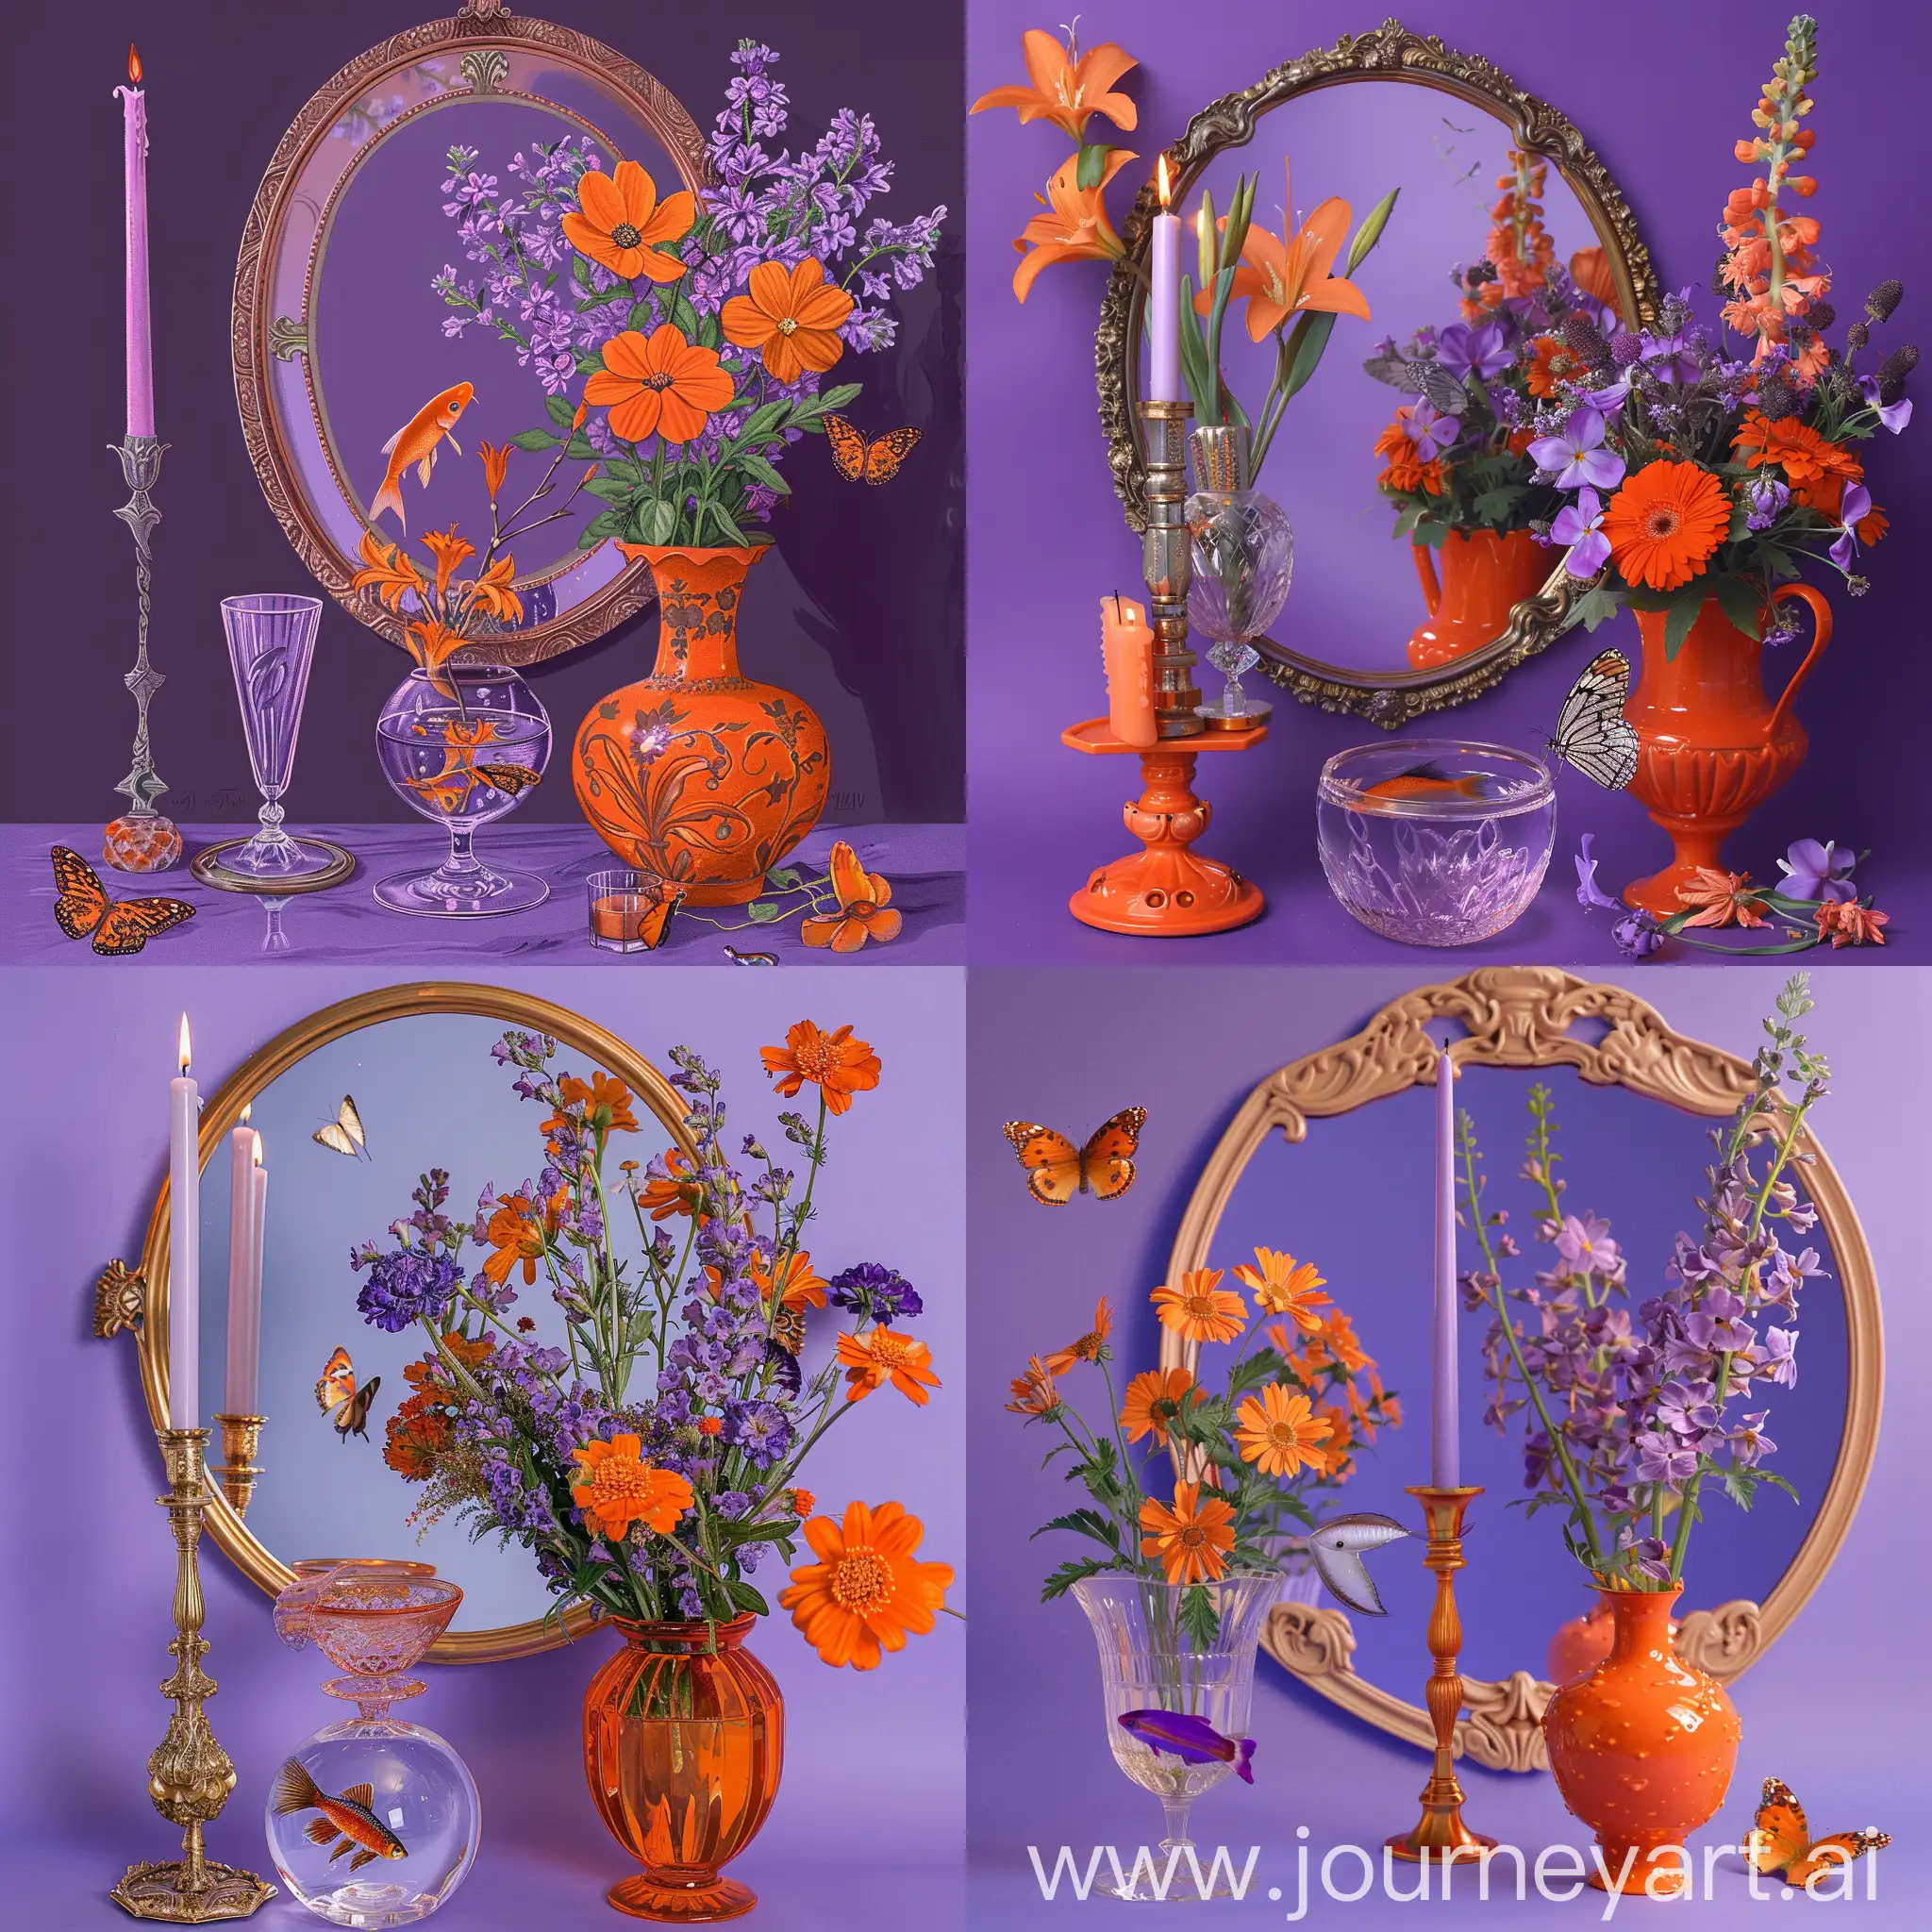 Purple-Background-Banner-with-Mirror-Iranian-Candlestick-Fish-Flowers-and-Butterfly